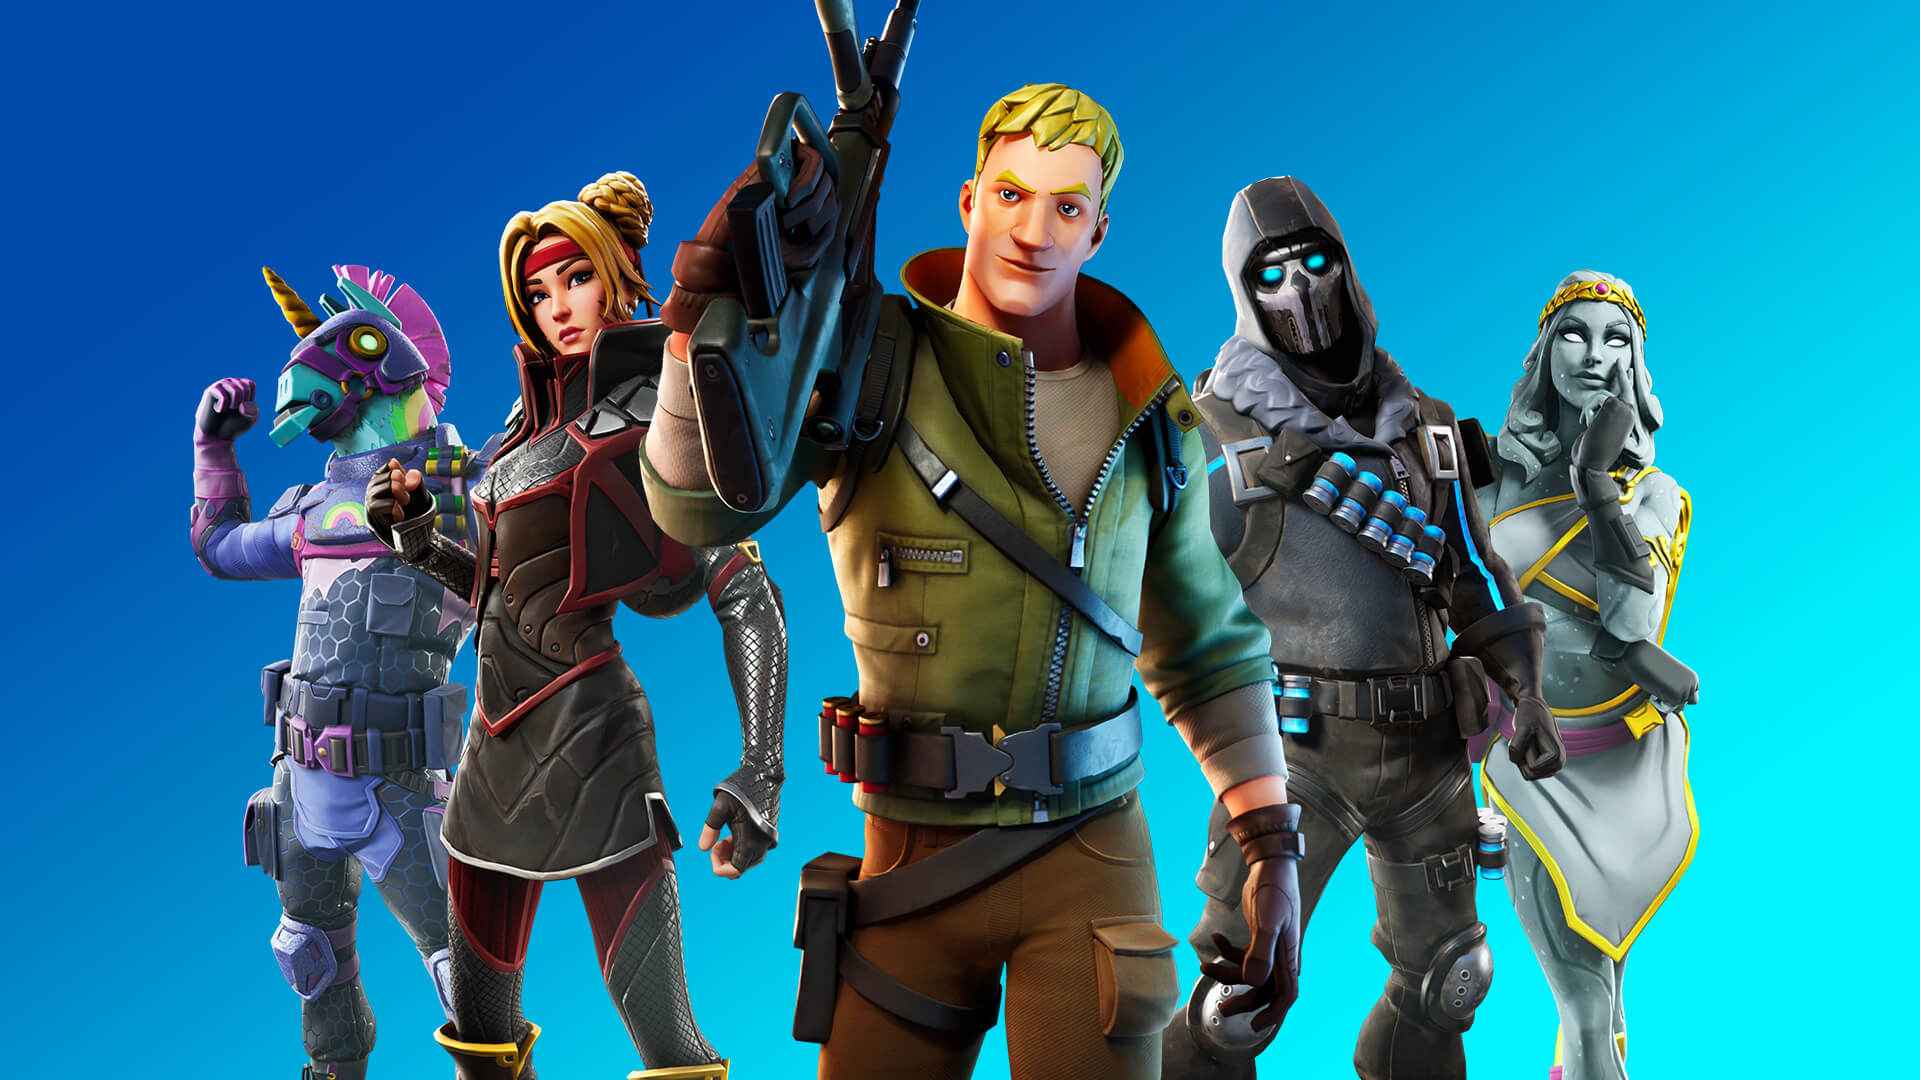 [Updated] Fortnite 12.40 update patch notes & Chapter 2 Season 3 start date revealed